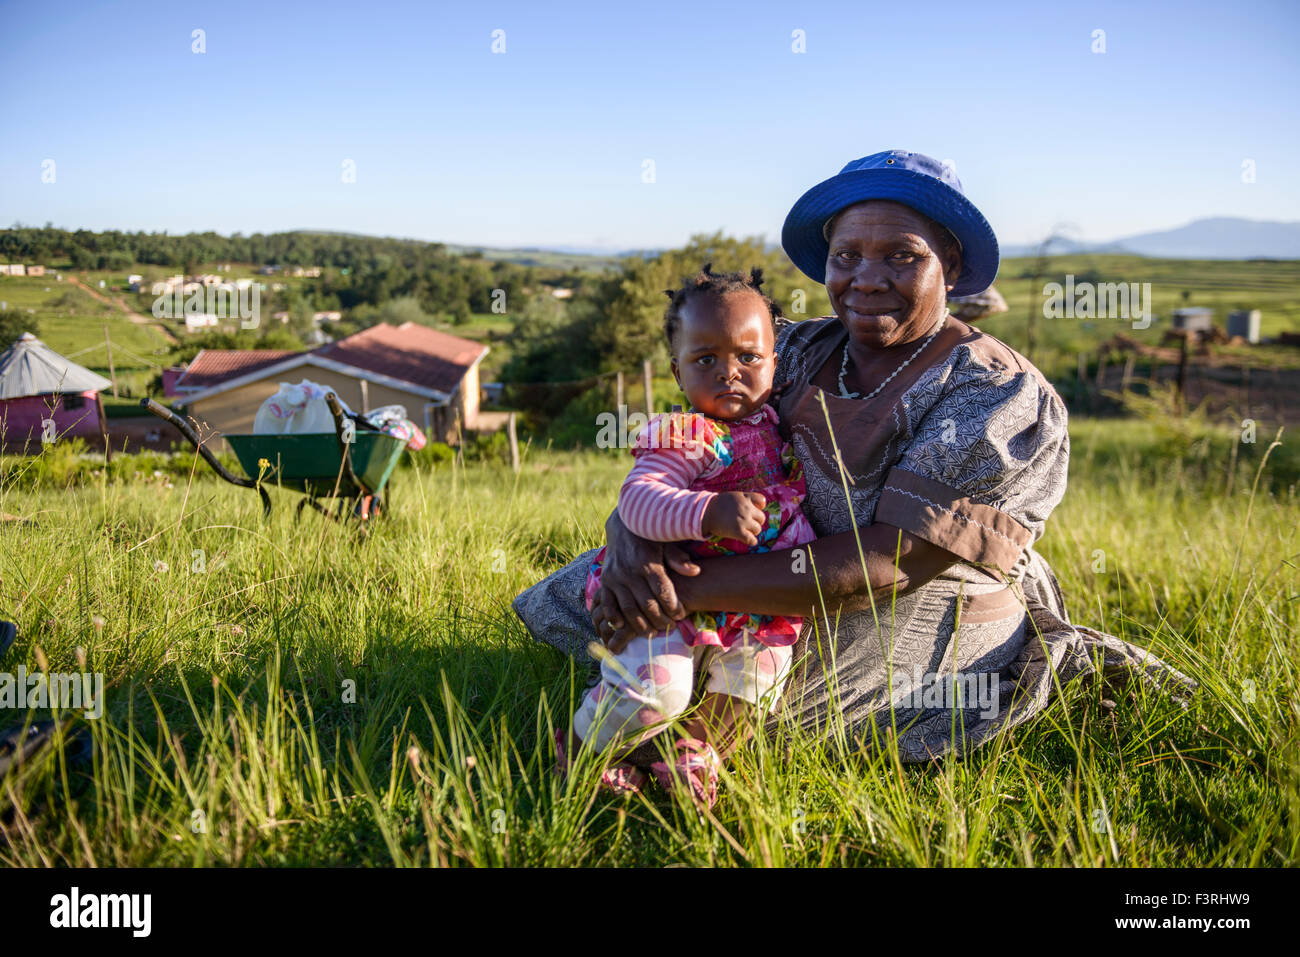 Elderly woman with baby of the Zulu tribe, KwaZulu Natal Province, South Africa Stock Photo